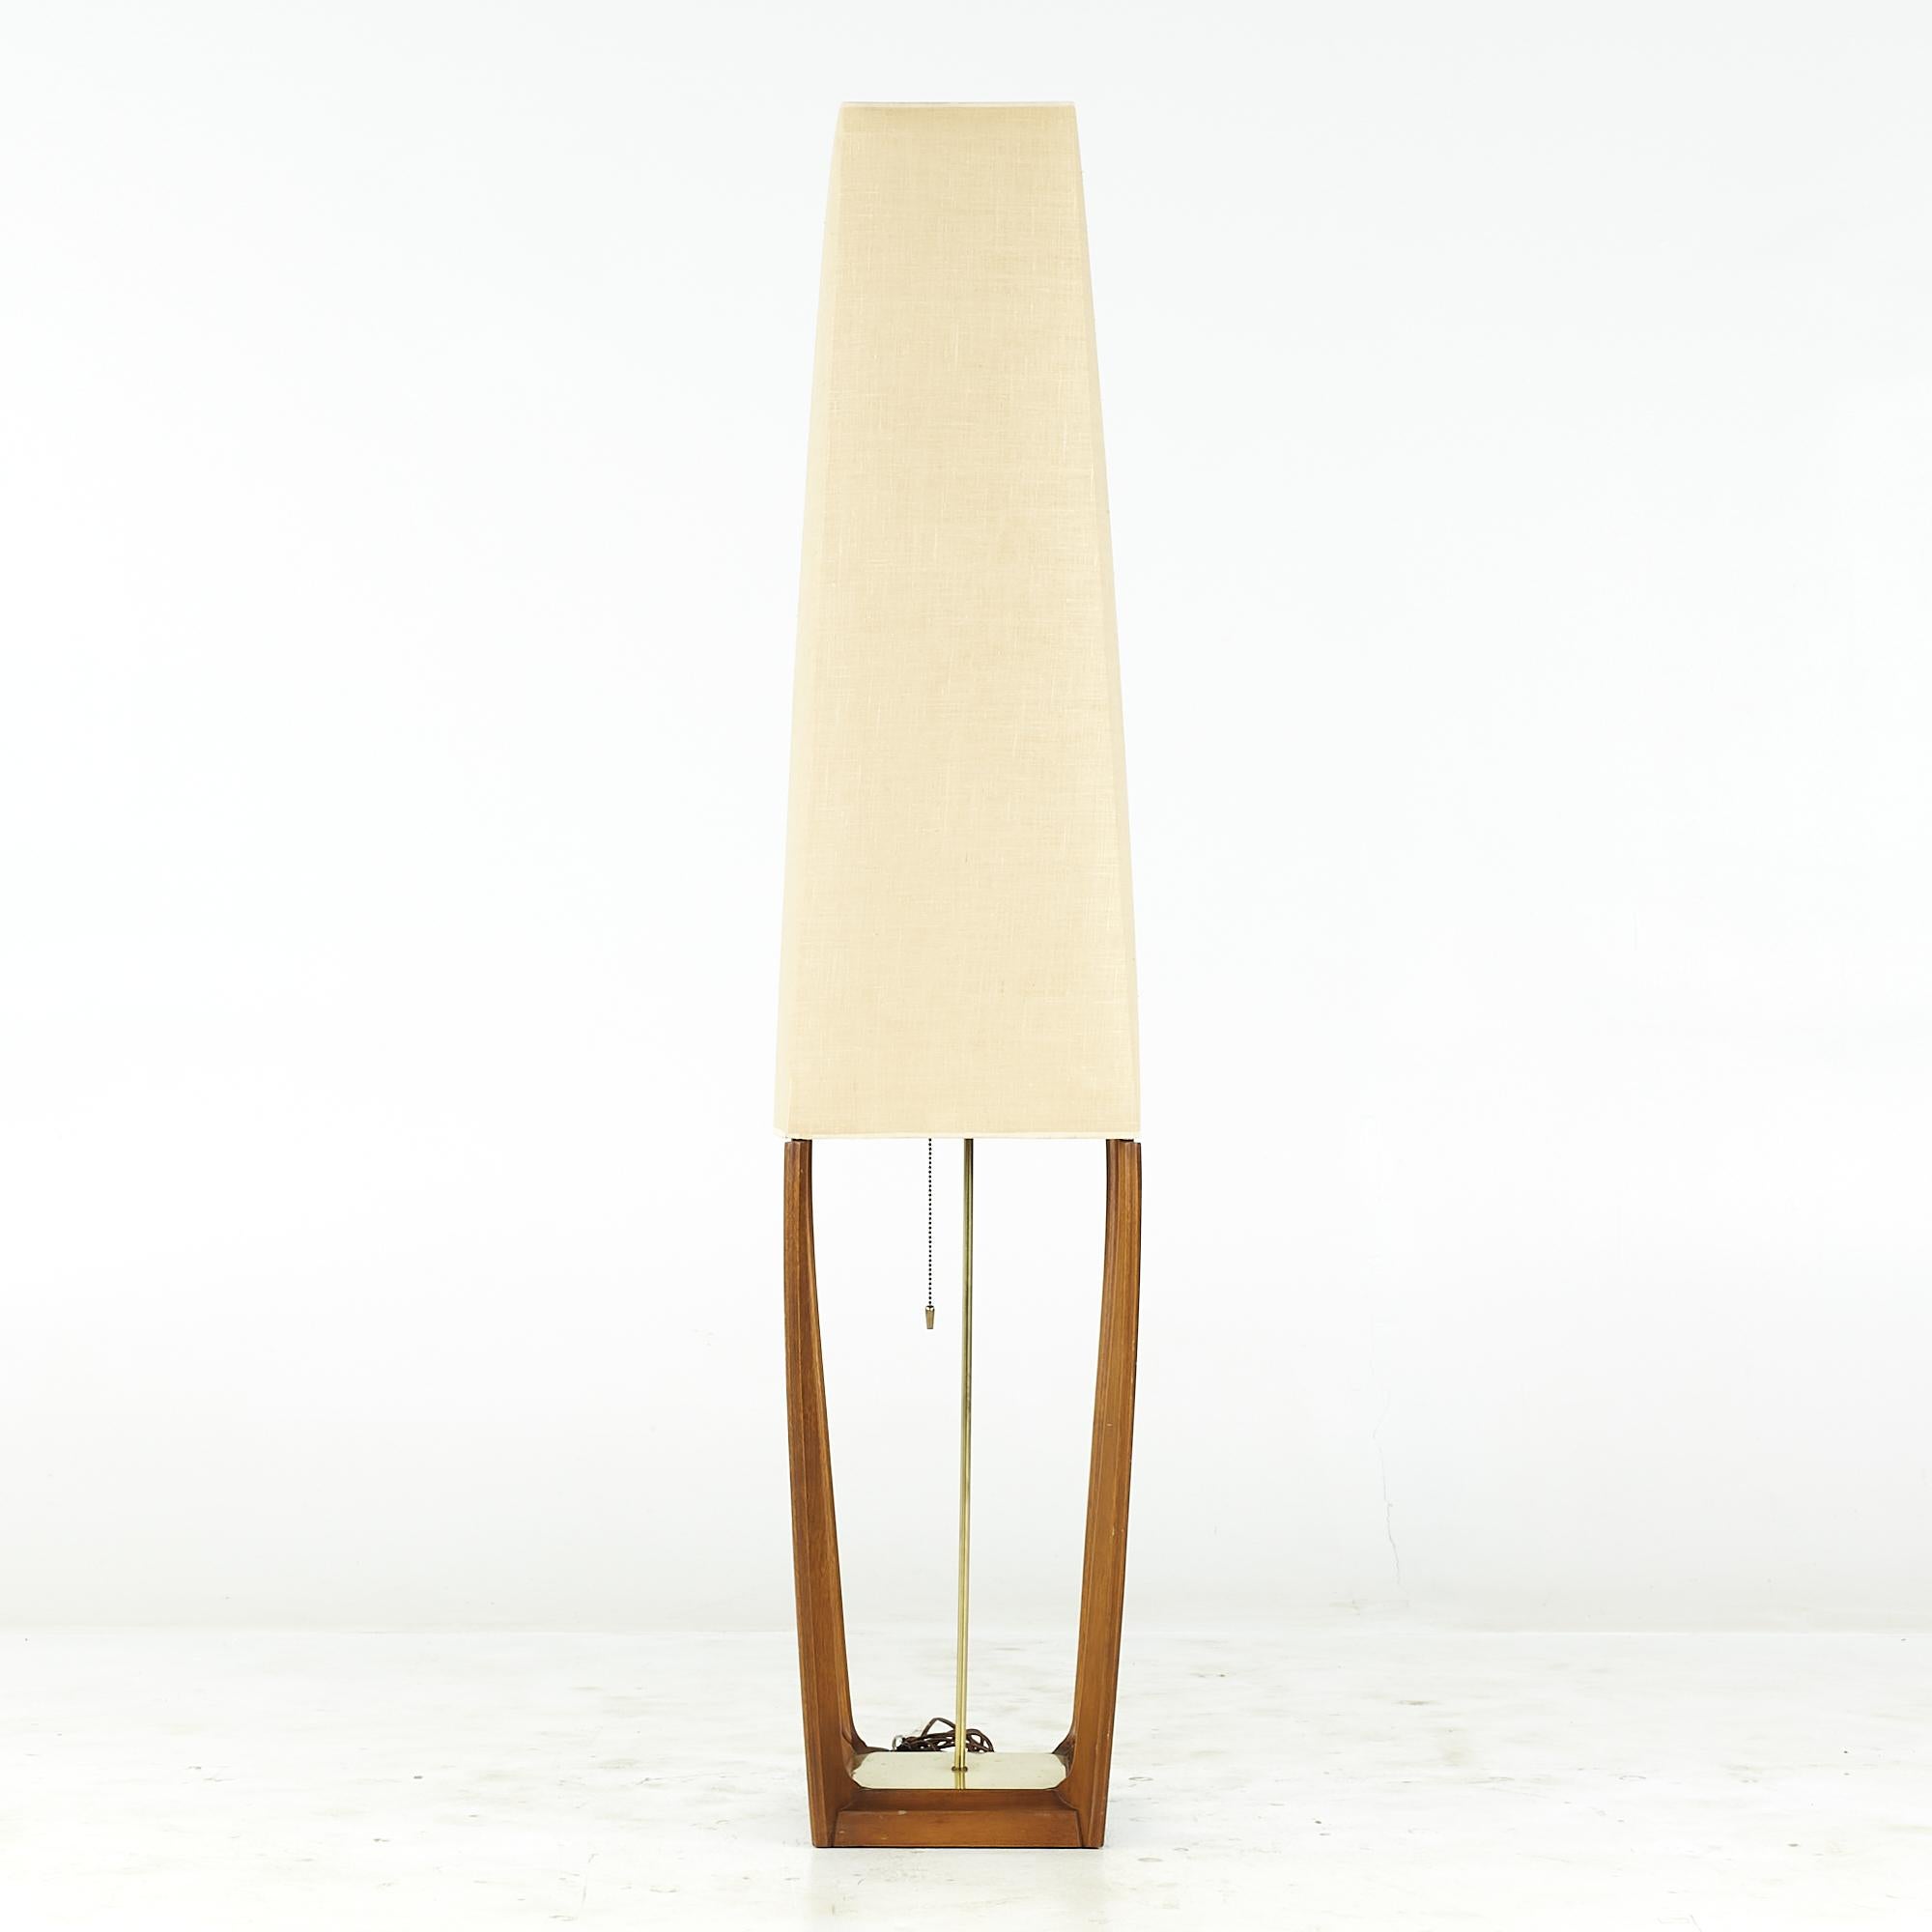 Modeline Style midcentury Walnut and Brass Floor Lamp

 This floor lamp measures: 12.25 wide x 12.25 deep x 60.5 inches high

We take our photos in a controlled lighting studio to show as much detail as possible. We do not photoshop out